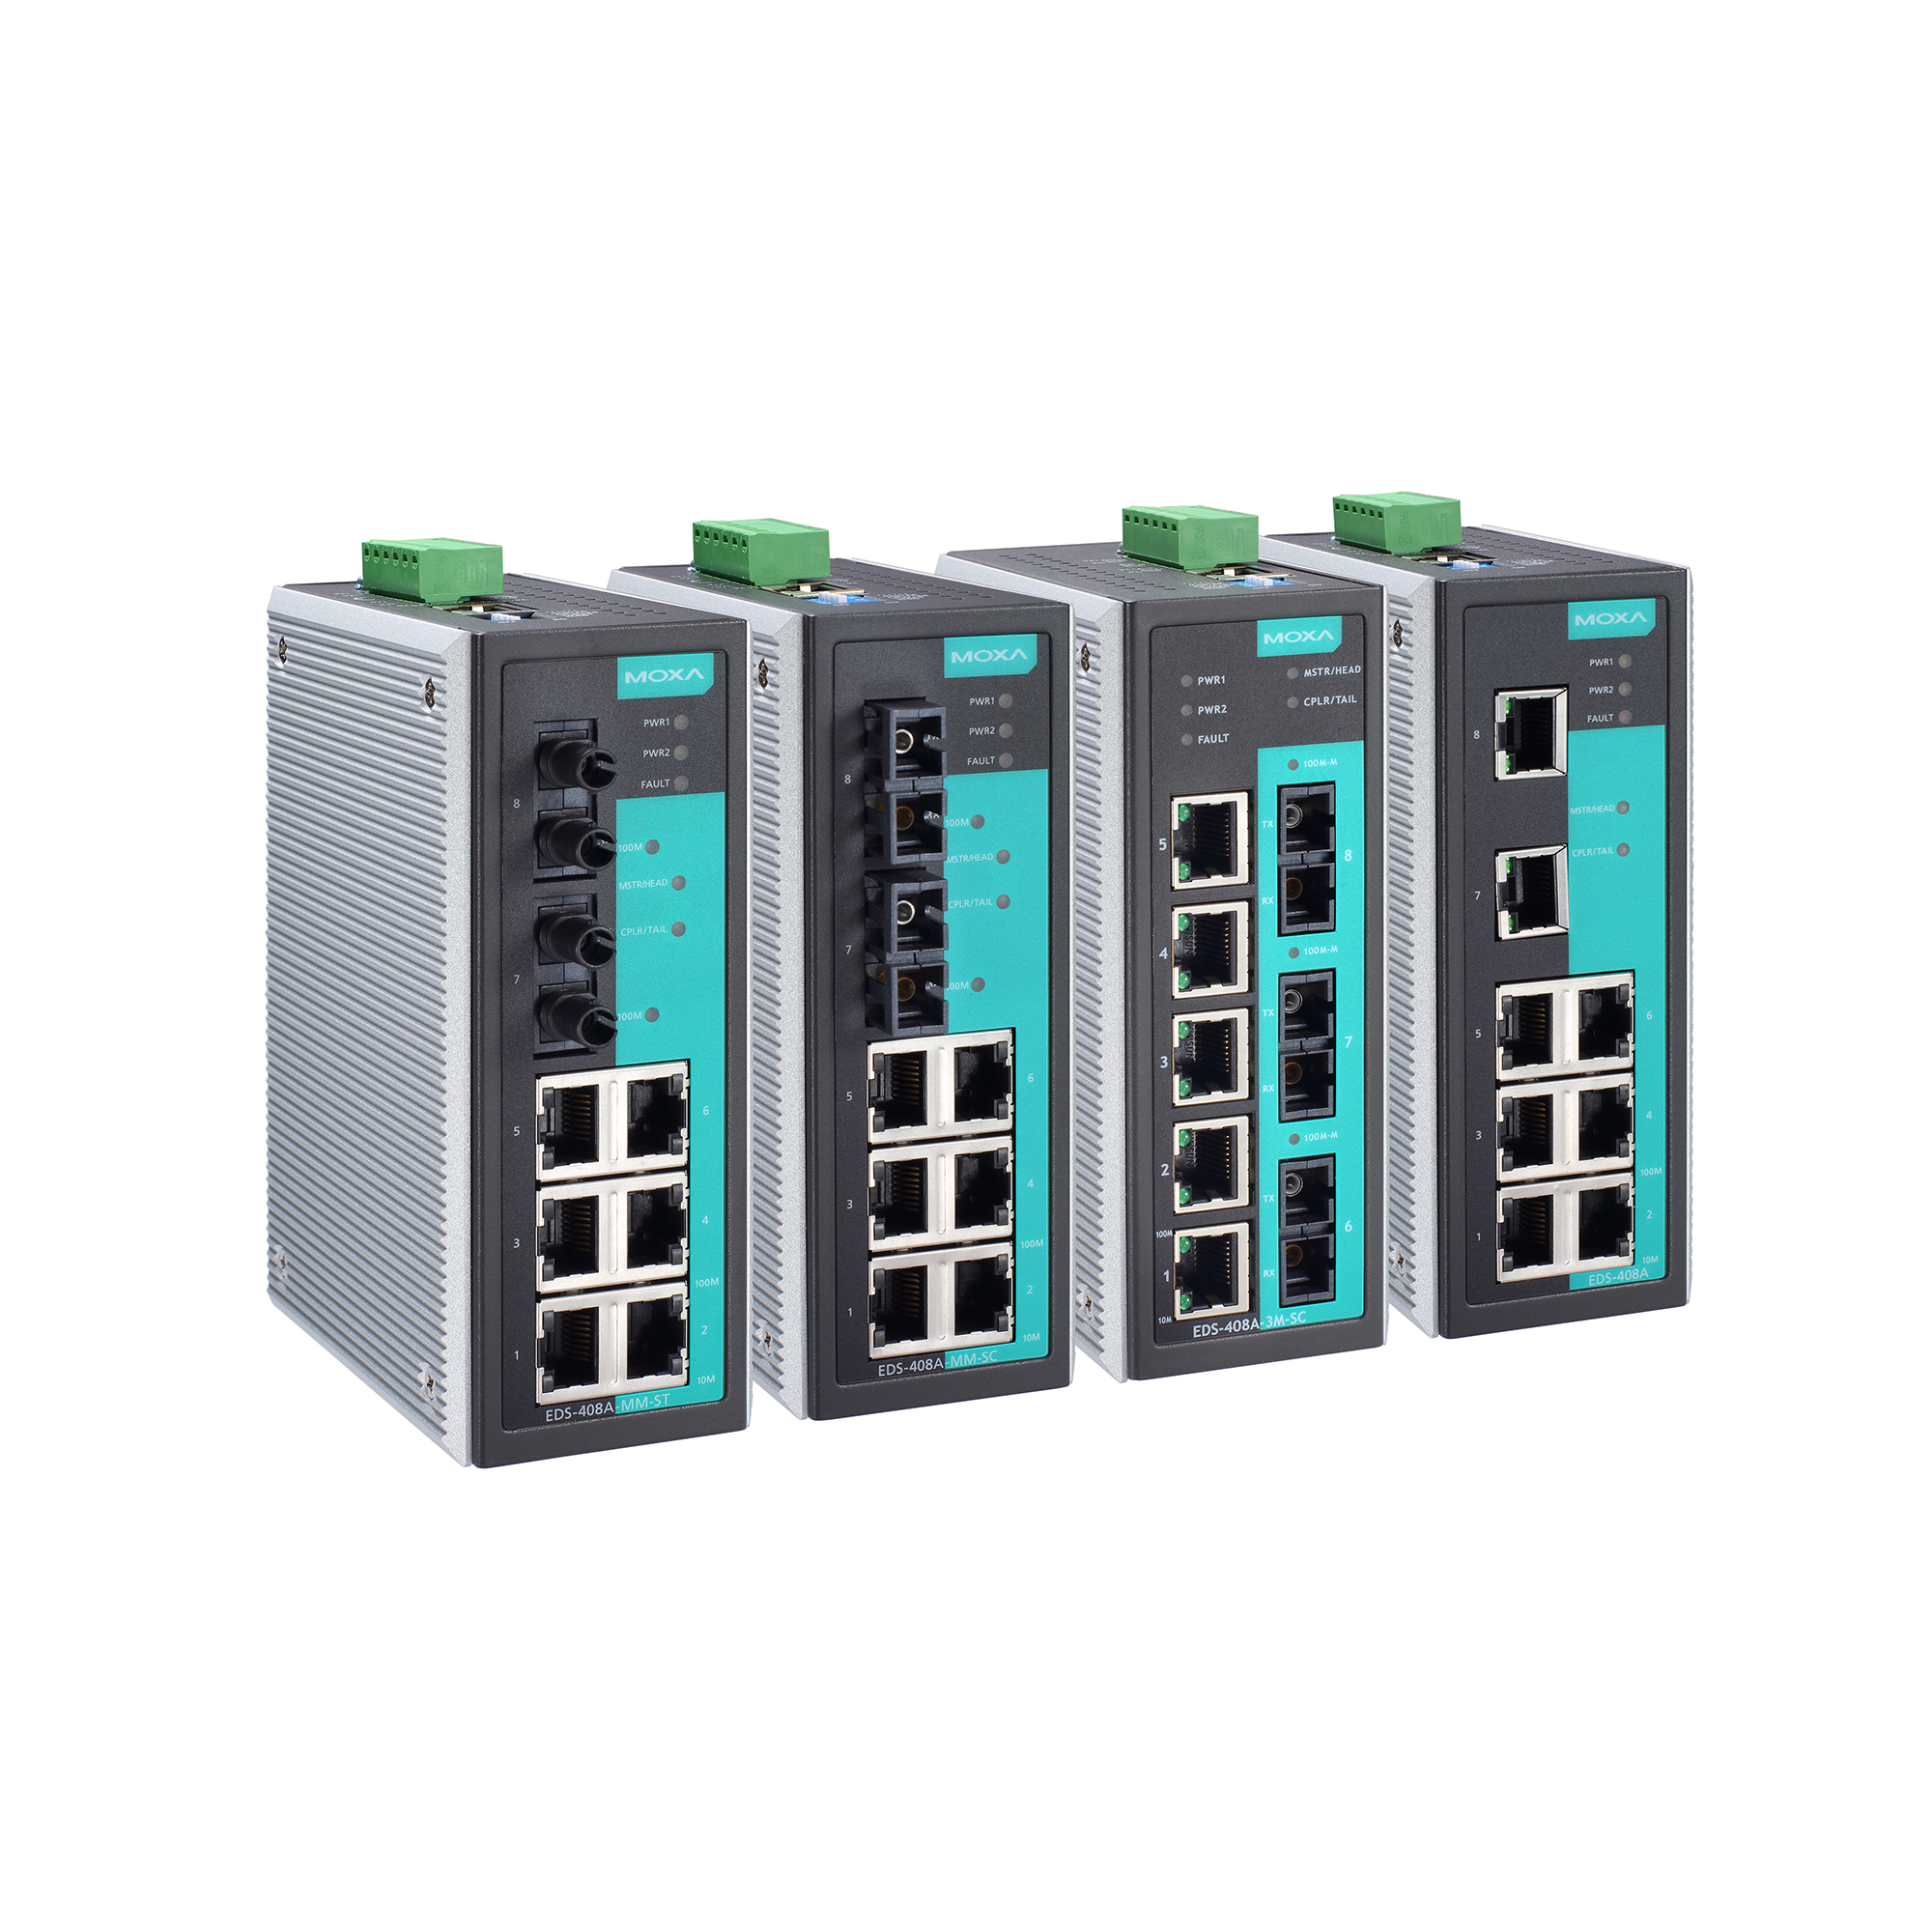 Moxa eds-408a series managed switches